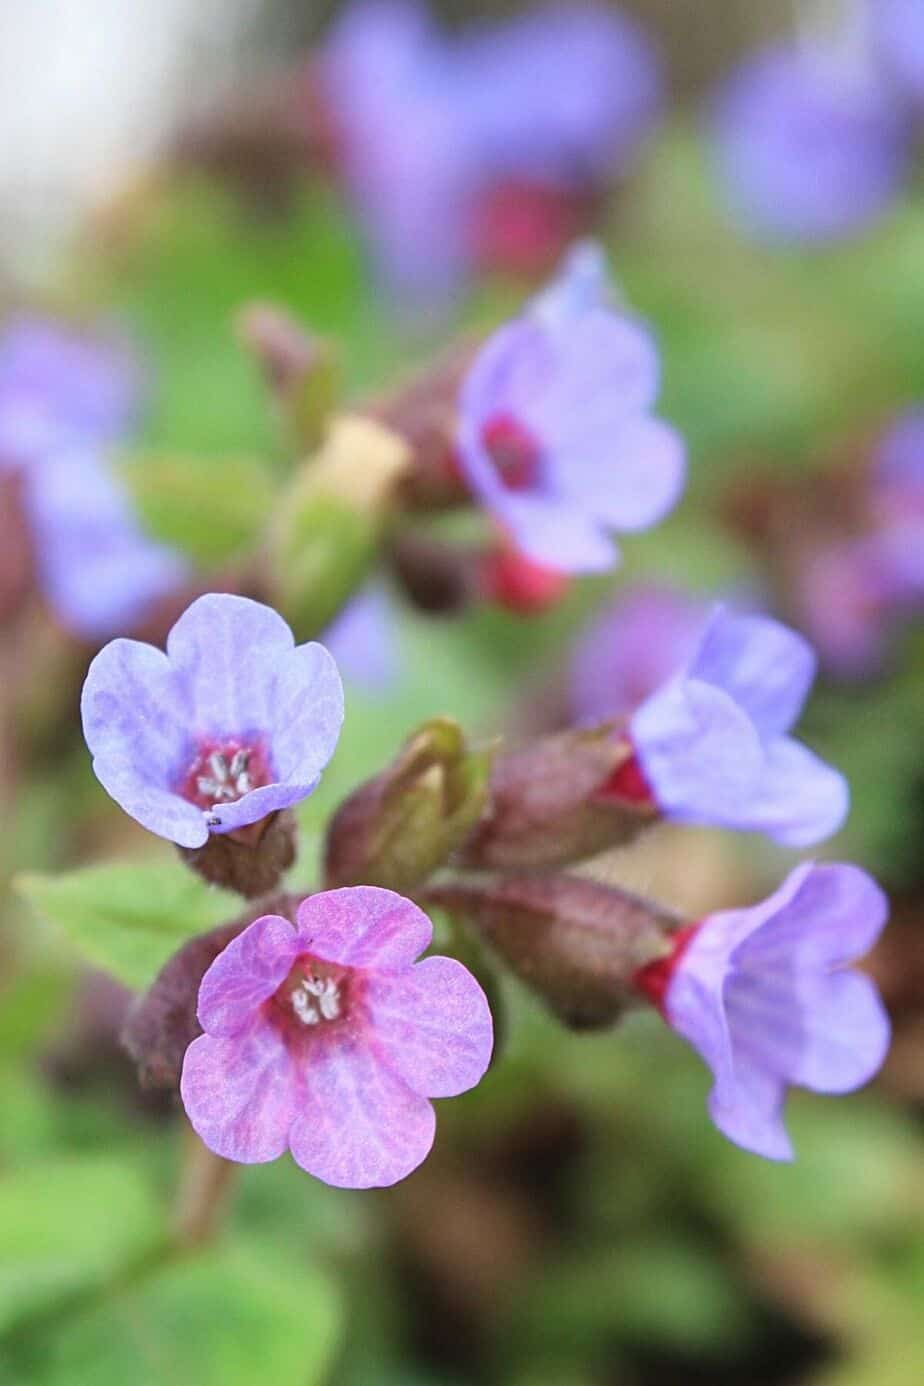 Since Pulmonaria (Lungwort) is a forest plant, it can survive in areas receiving indirect to no light like the northwest-facing garden